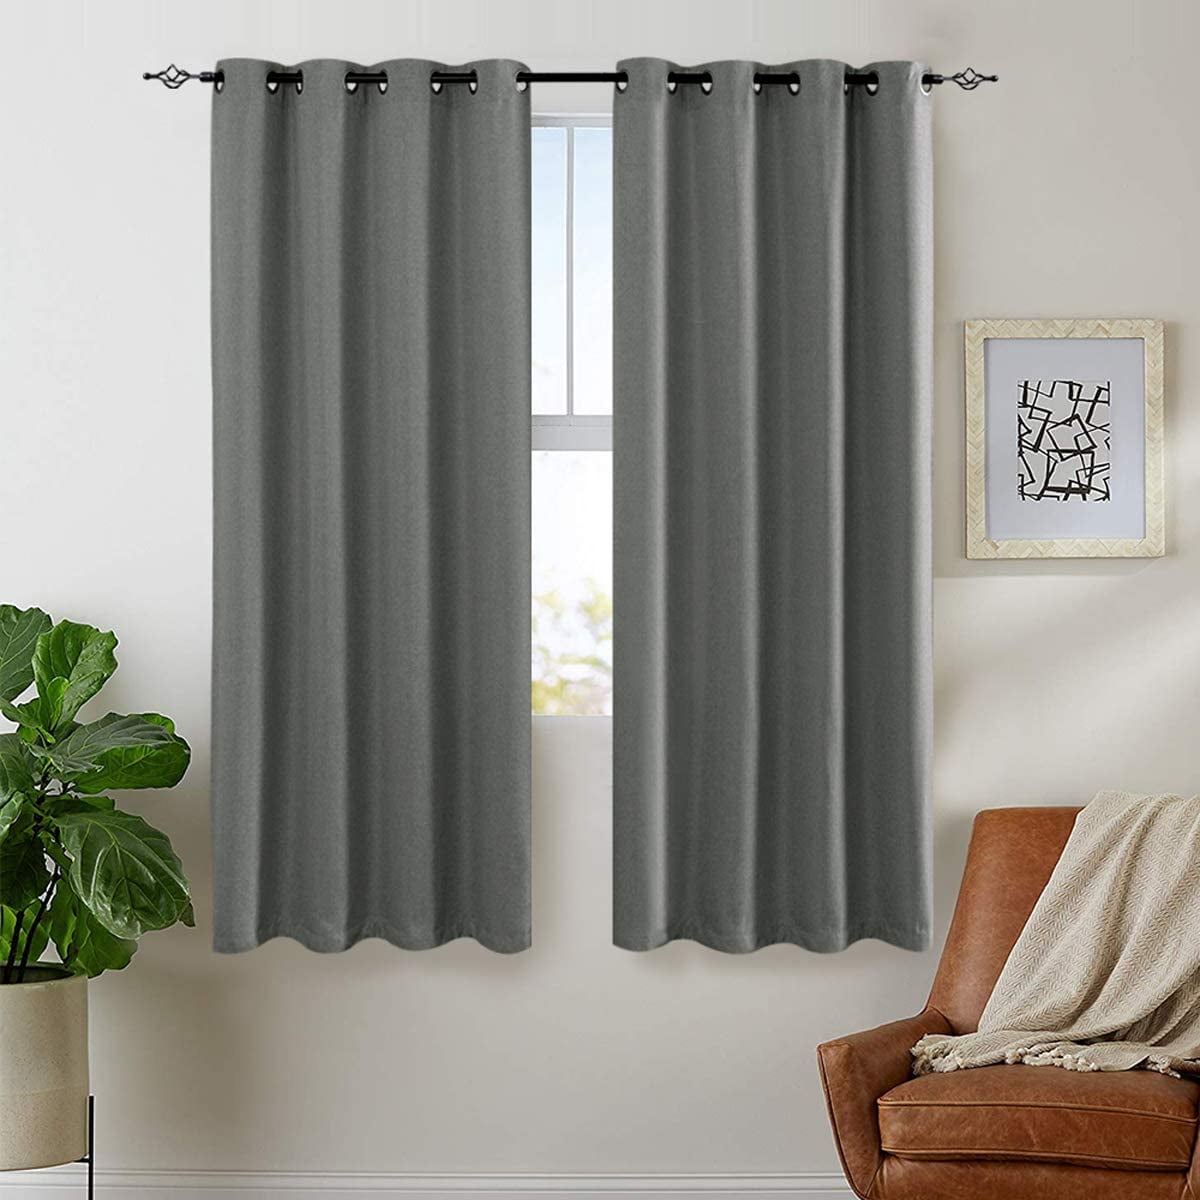 jinchan Thermal Insulated Faux Linen Room Darkening Curtains for Bedroom 63 